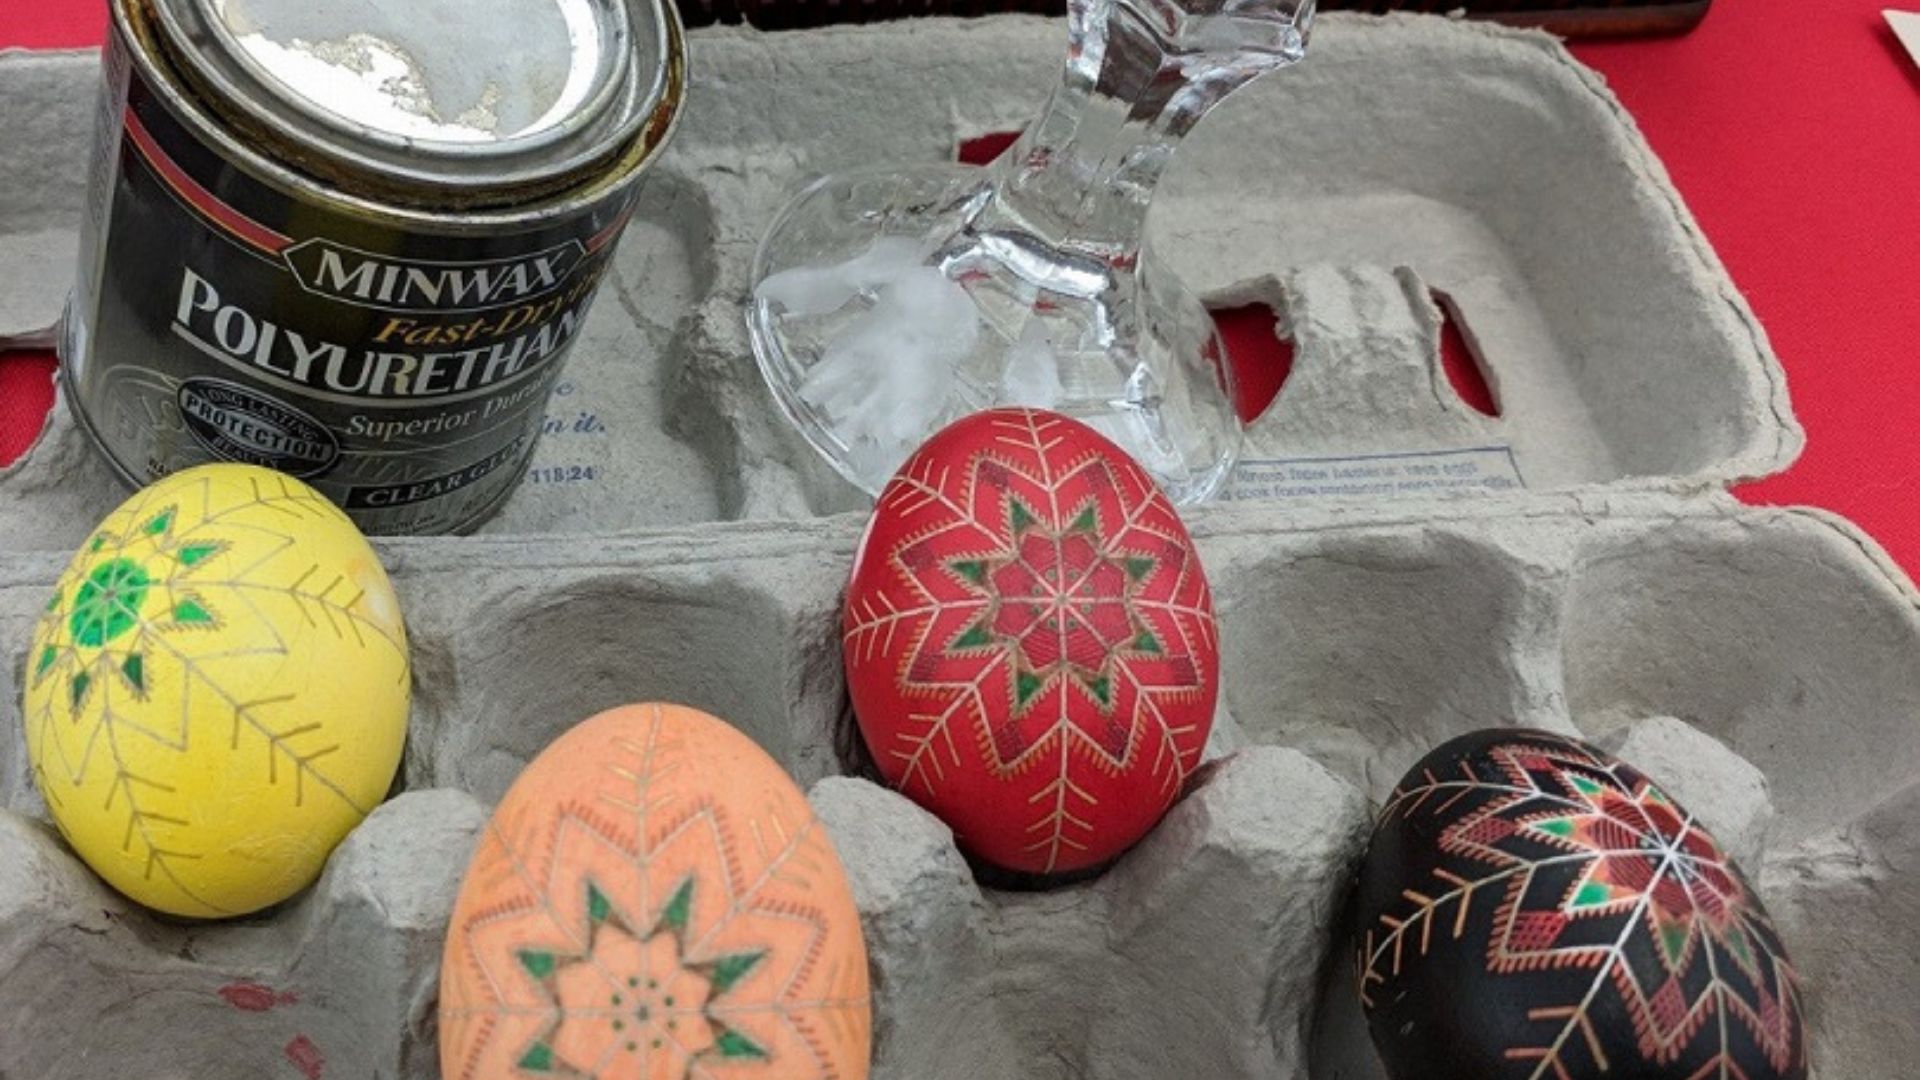 pysanky supplies and samples